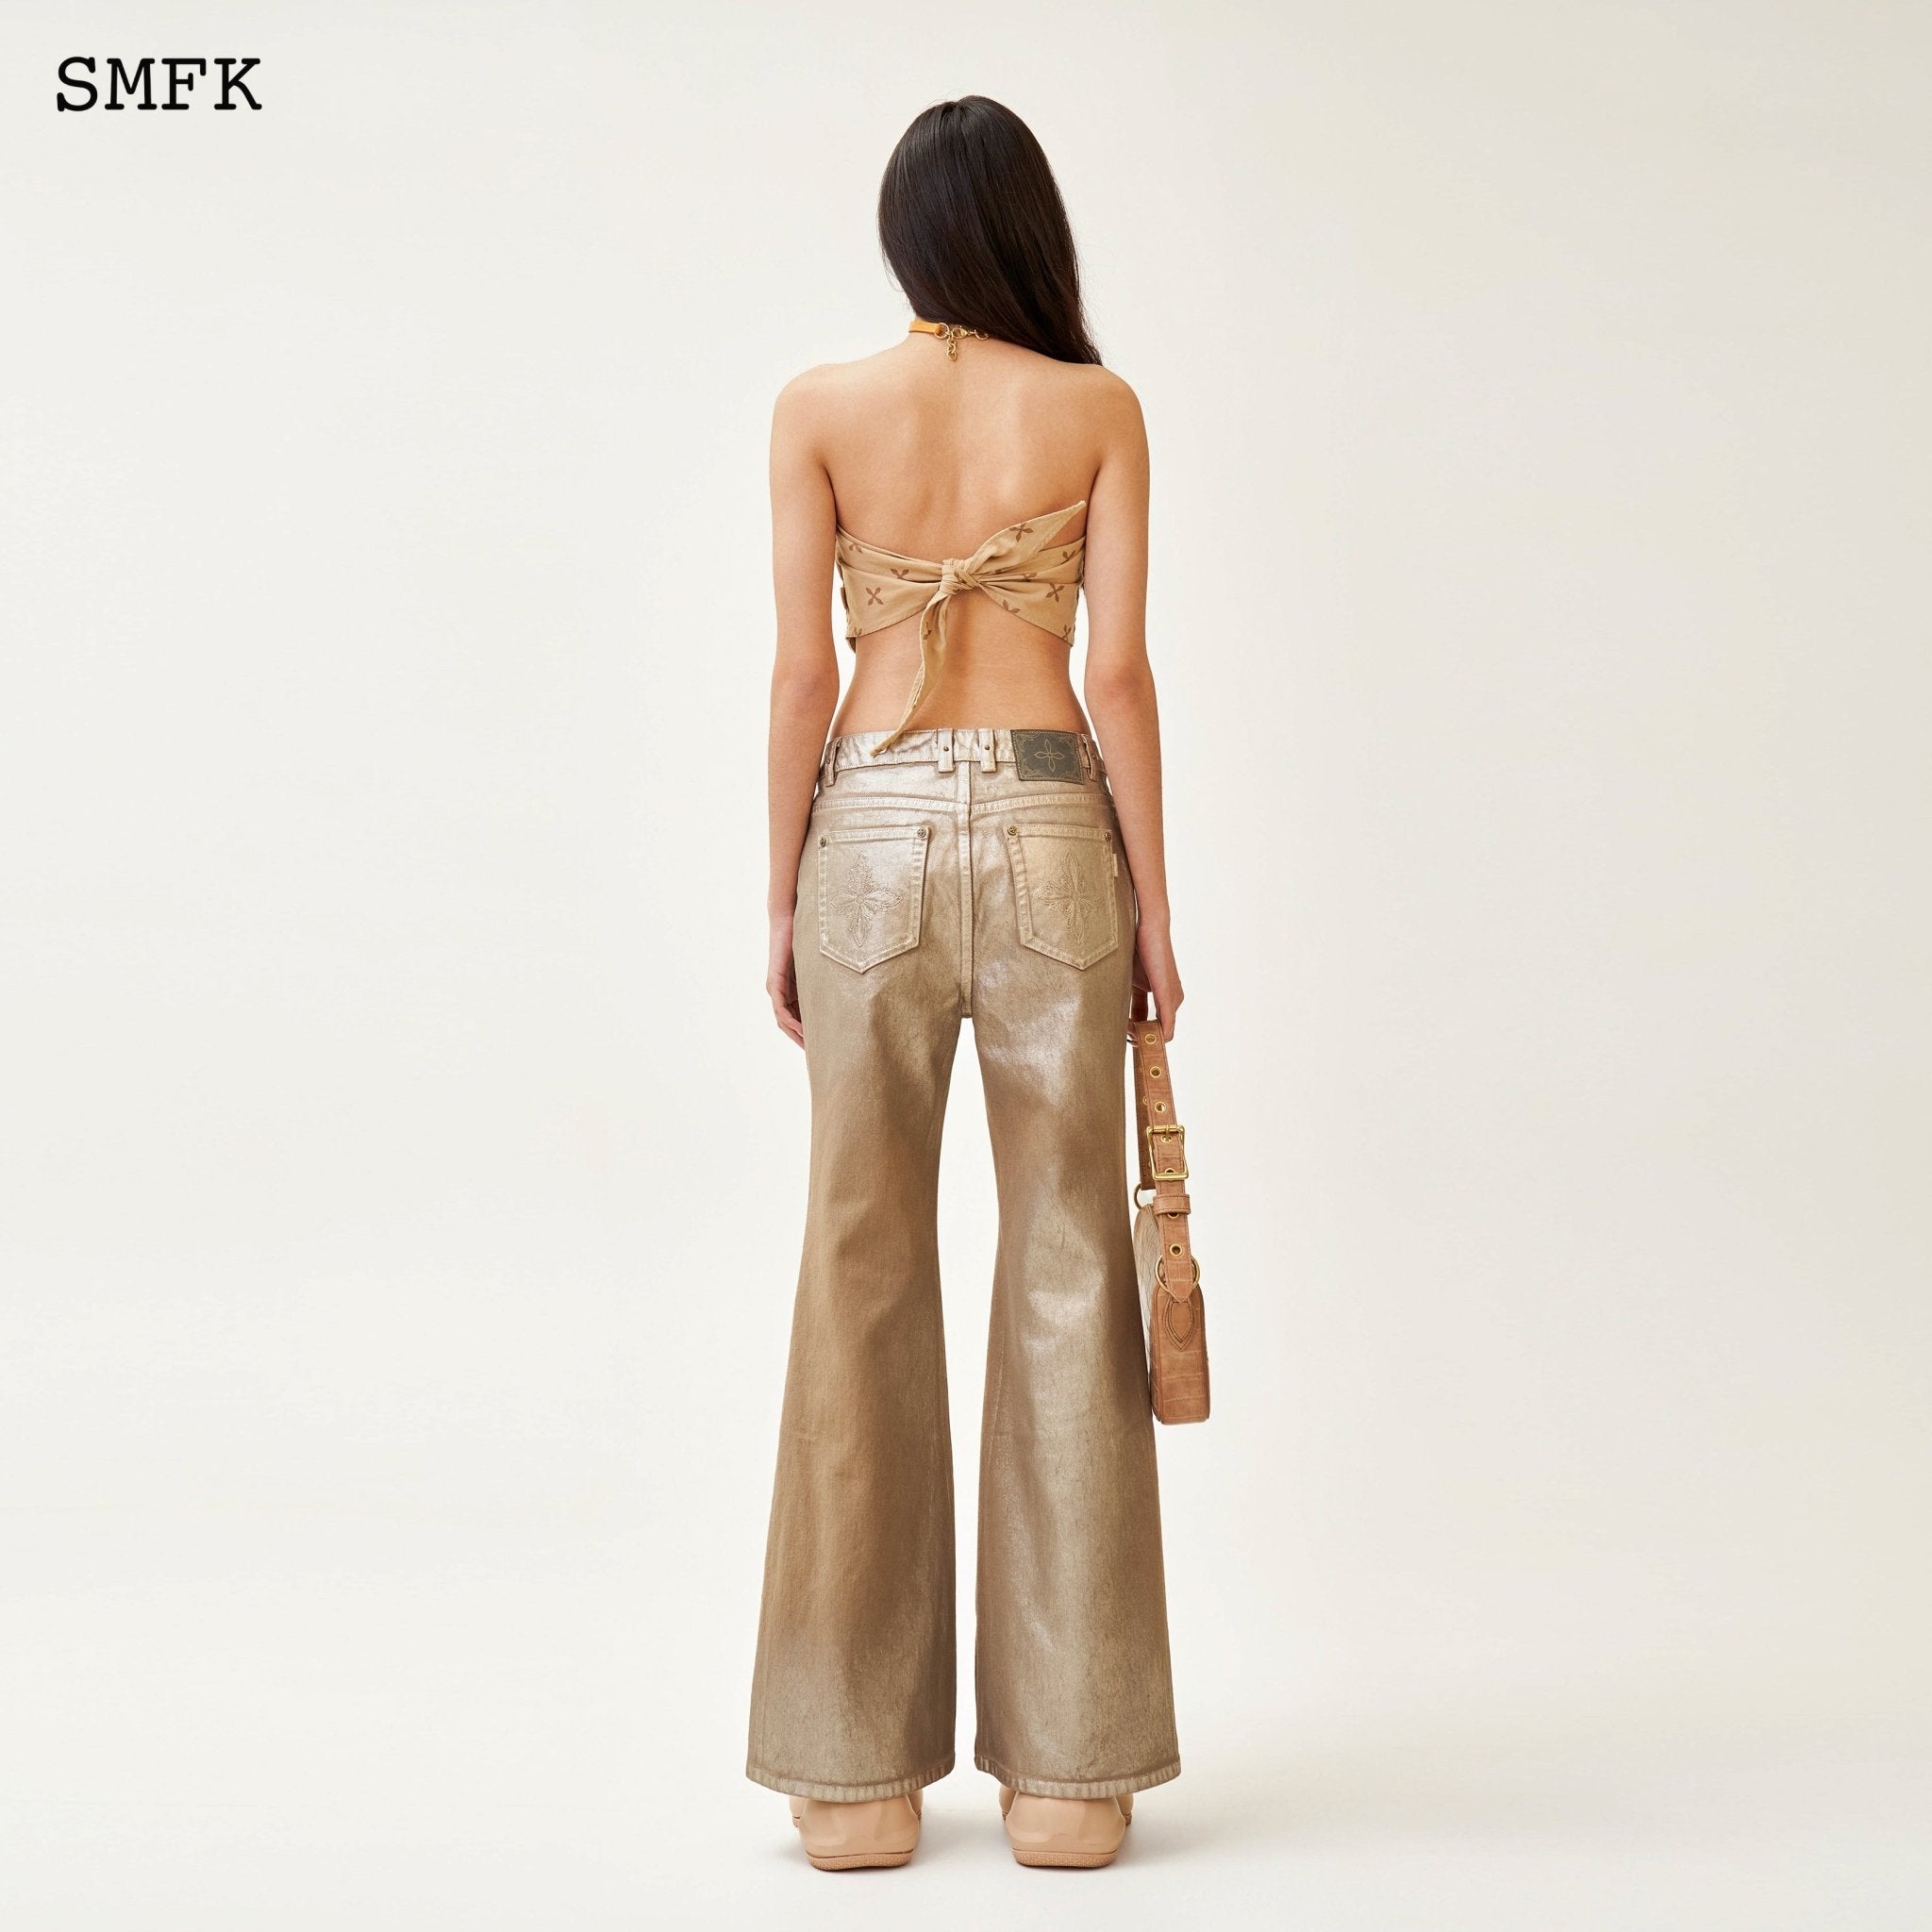 SMFK Ancient Myth Temple Garden Bandeau Tube Top | MADA IN CHINA